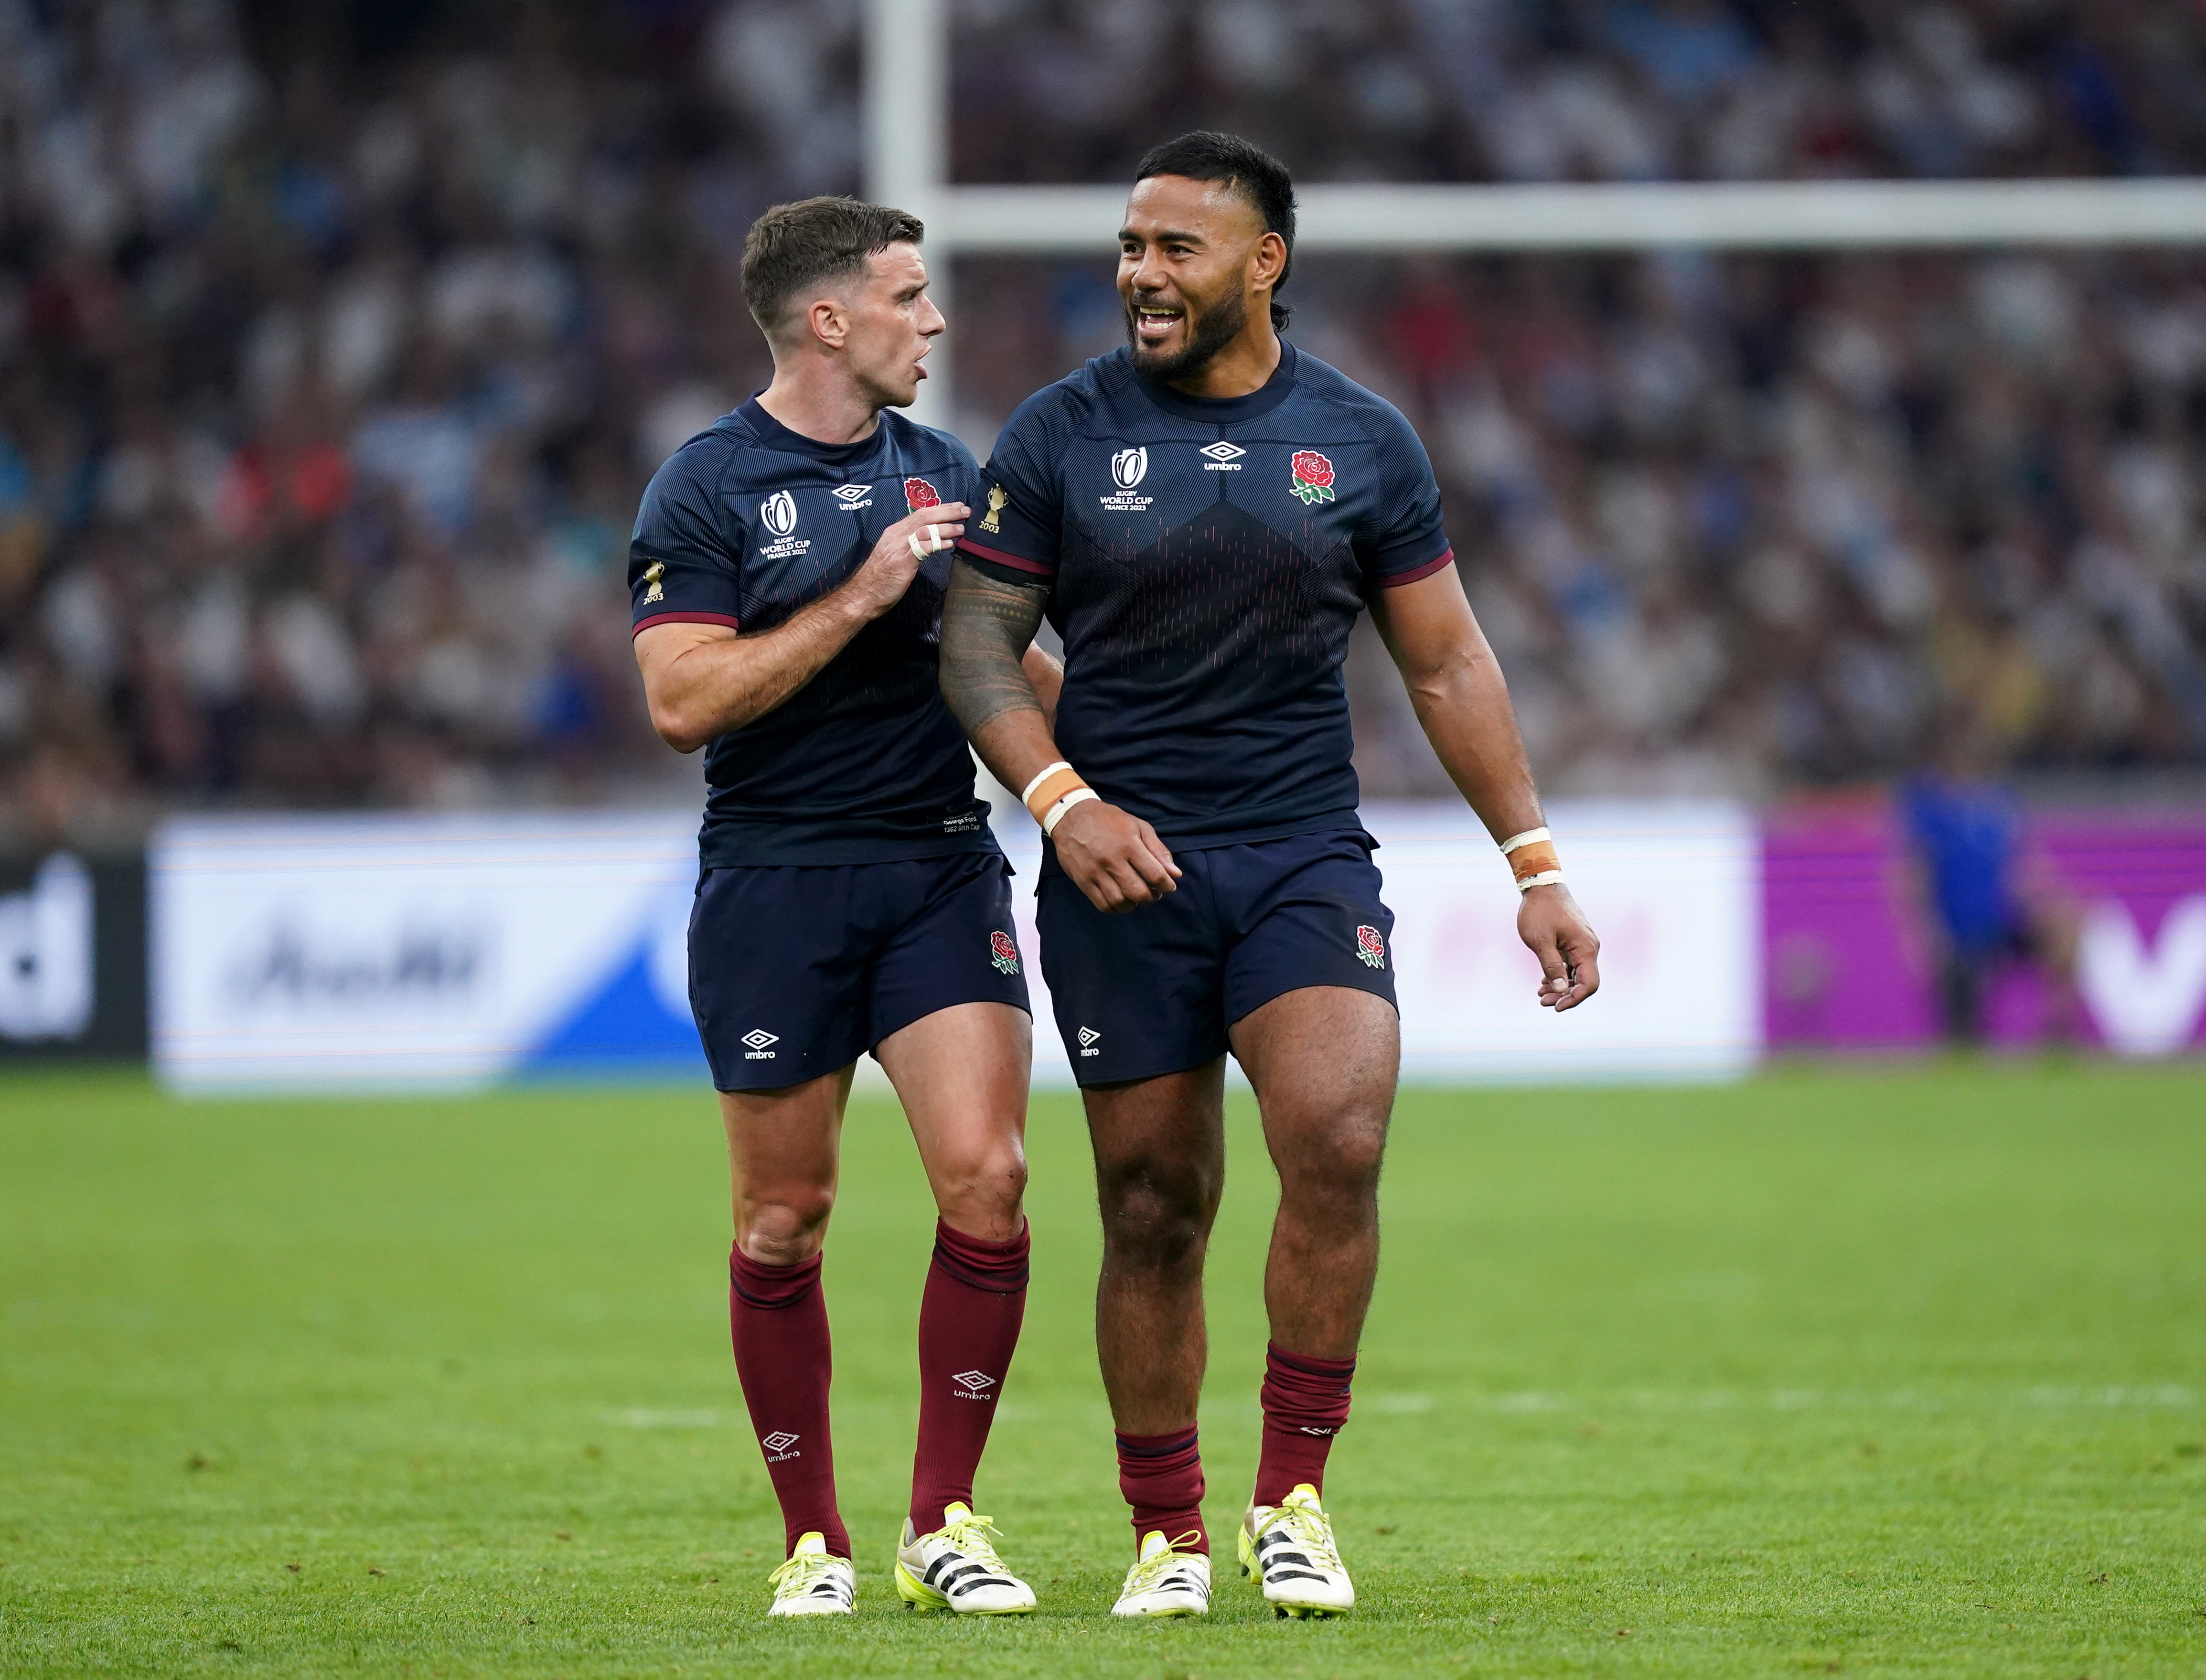 George Ford, left, and Manu Tuilagi celebrate victory over Argentina